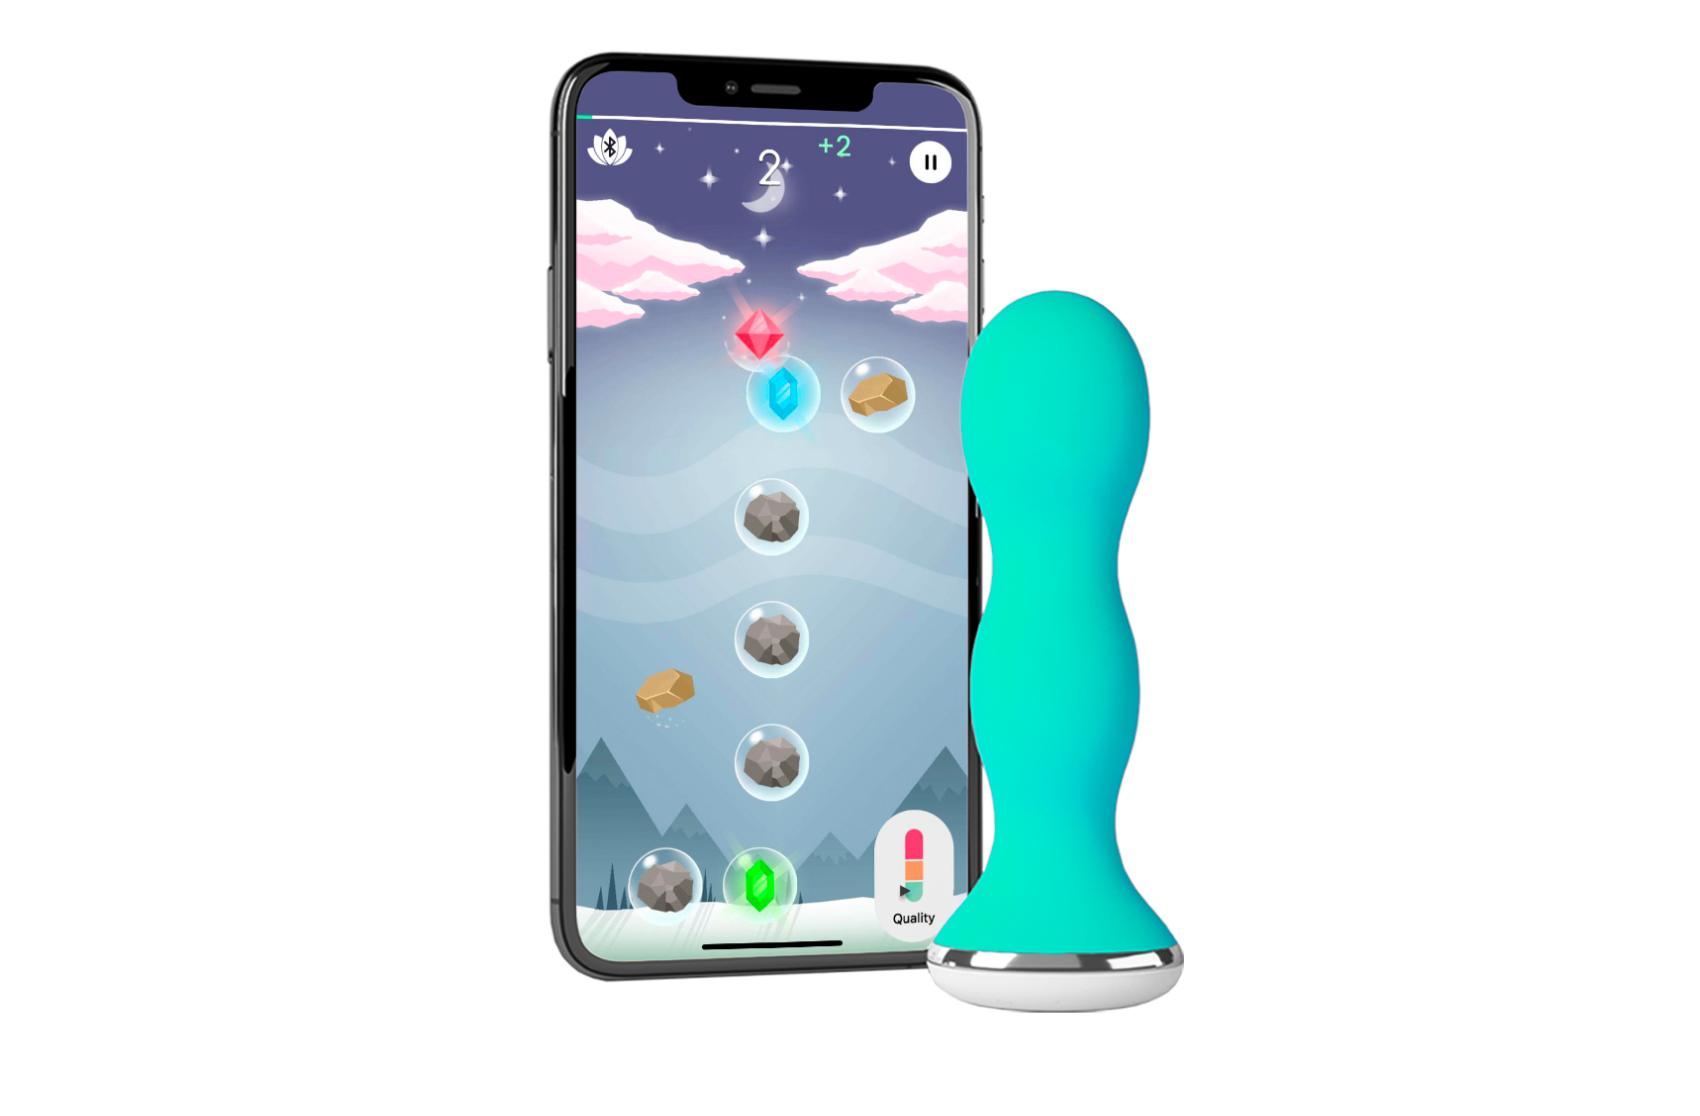 Perifit Pelvic Floor Exerciser Review - The Birth Hour